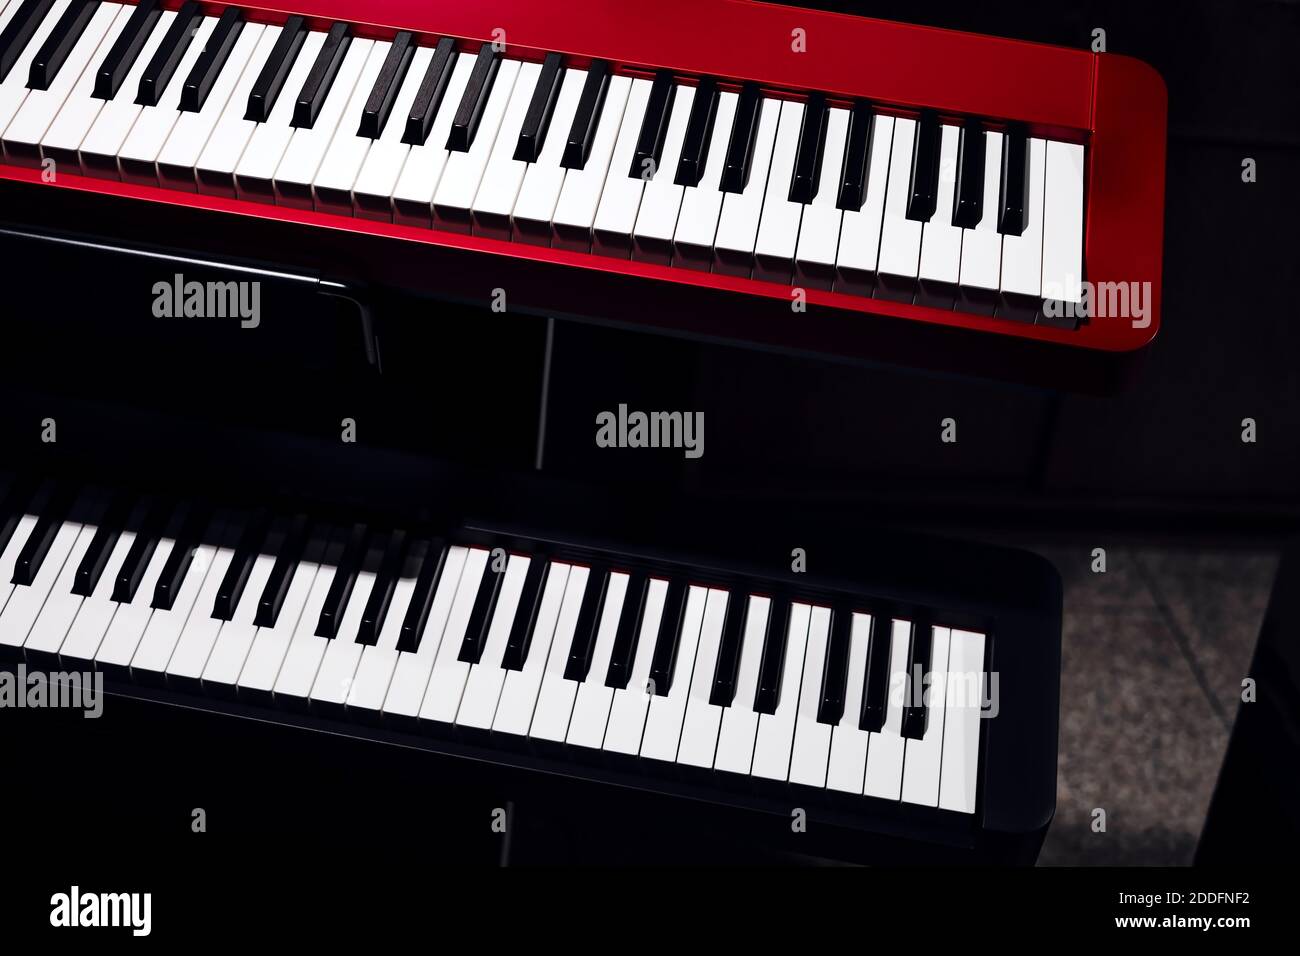 Electronic synthesizers (piano keyboards) close-up shot with dark background. Beautiful red and black musical keyboards with black and white keys. Stock Photo